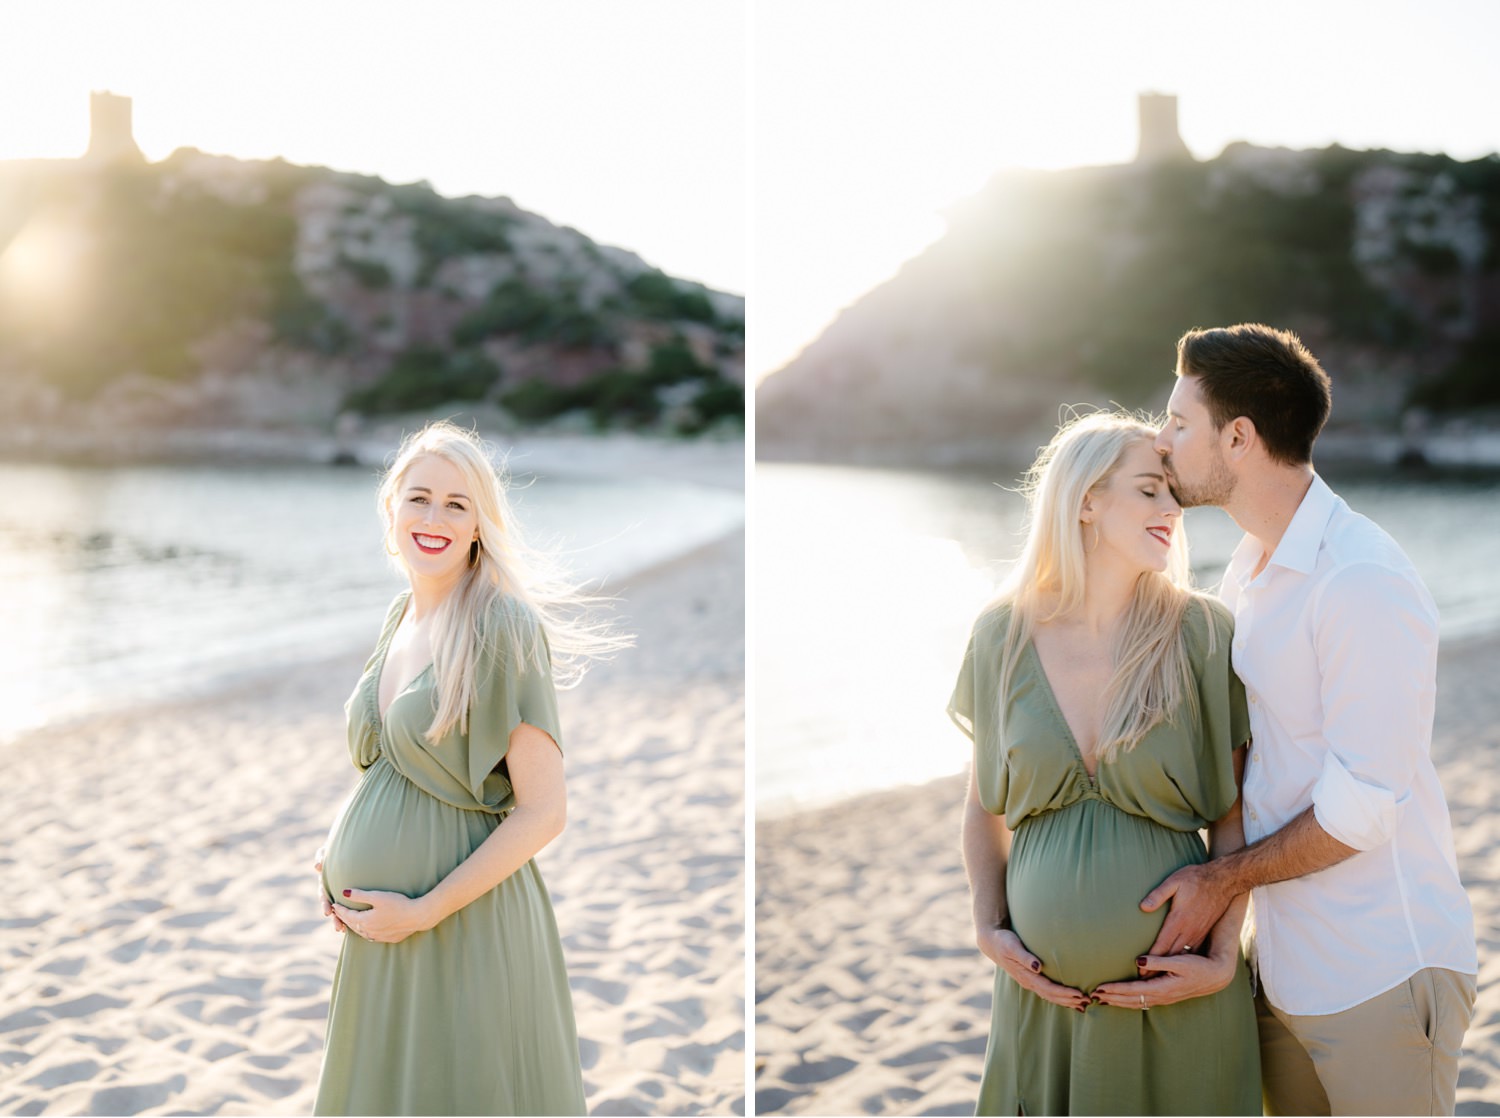 Pregnancy photo in Alghero with couple walking hand in hand on the beach